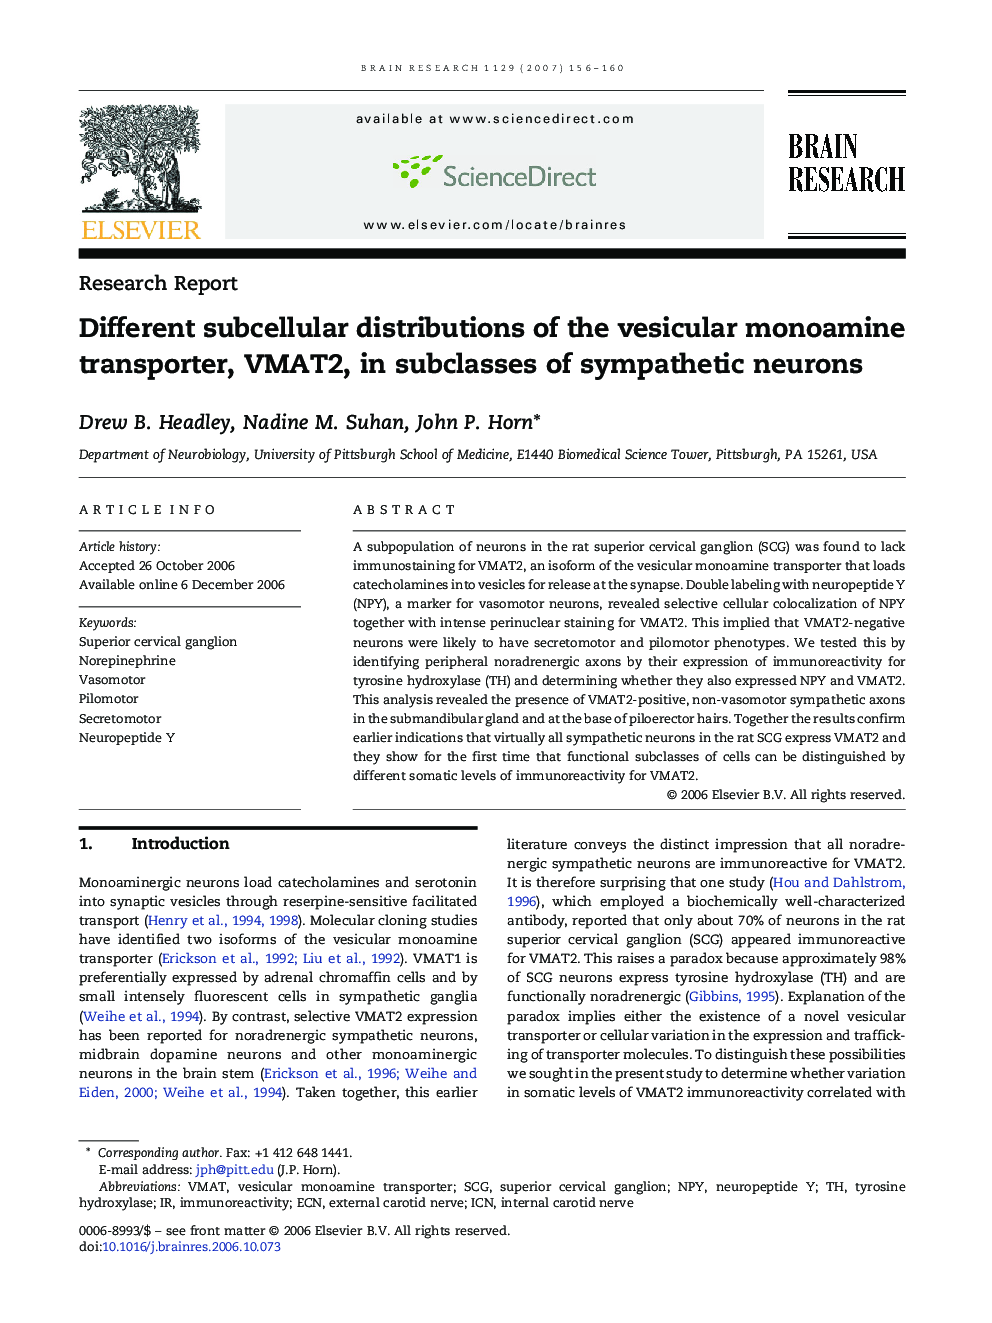 Different subcellular distributions of the vesicular monoamine transporter, VMAT2, in subclasses of sympathetic neurons